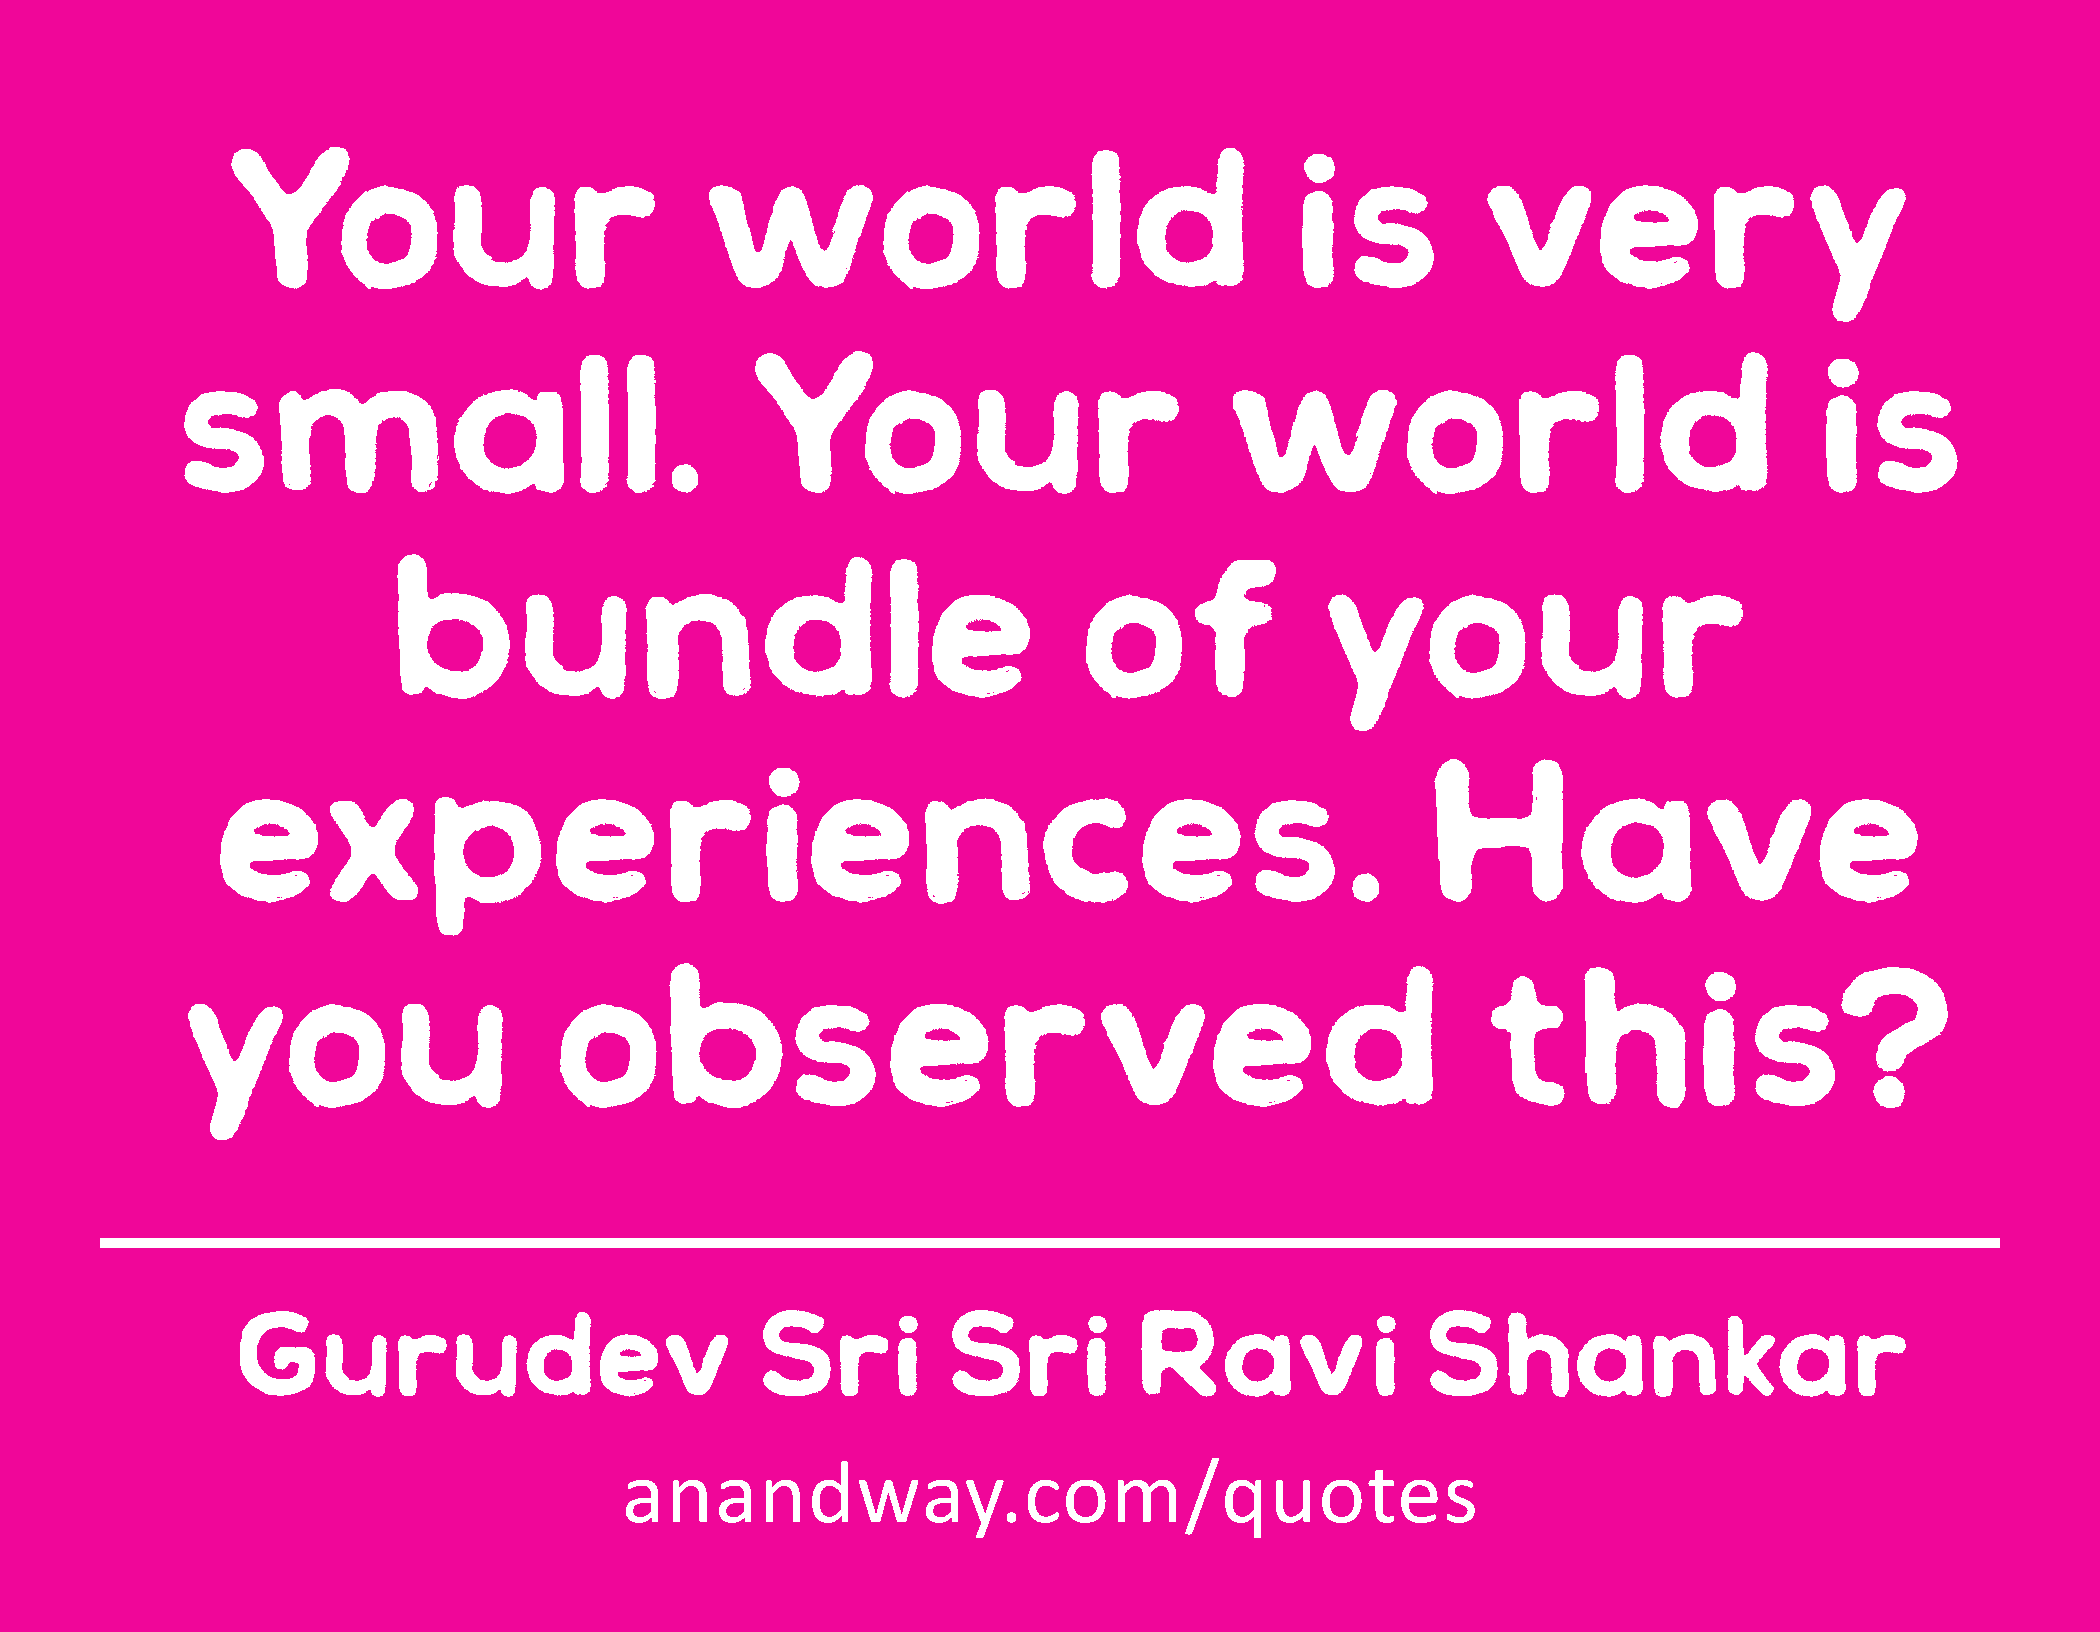 Your world is very small. Your world is bundle of your experiences. Have you observed this? 
 -Gurudev Sri Sri Ravi Shankar